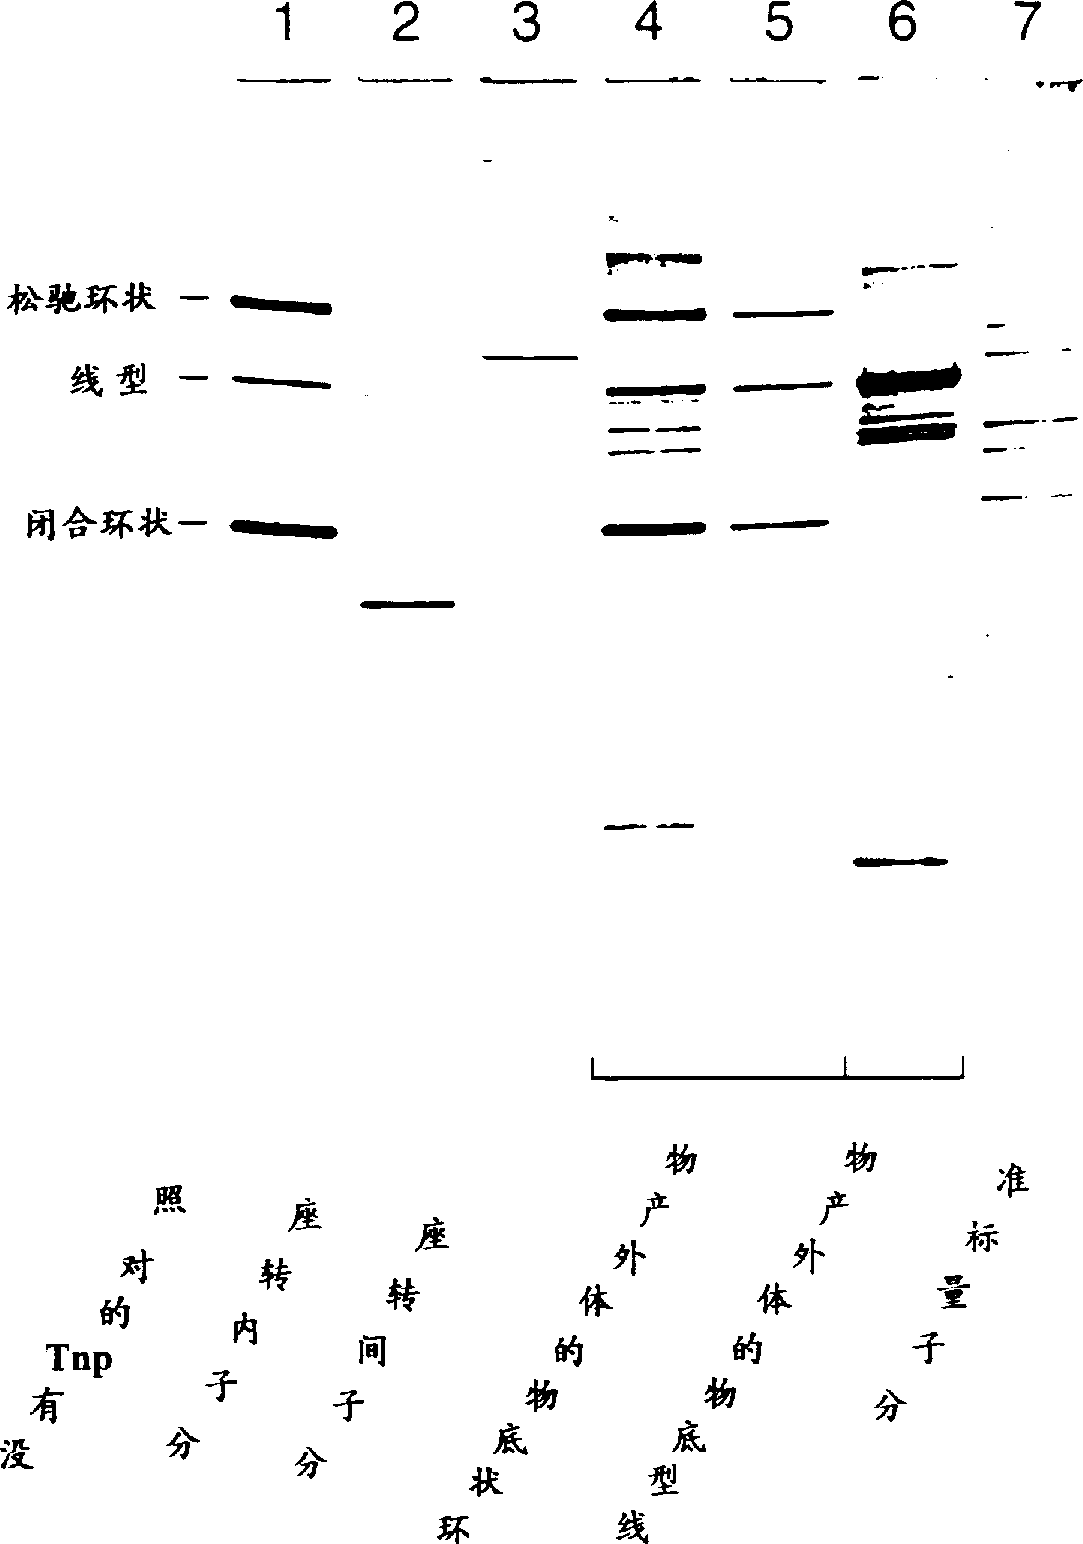 System for in vitro transportation using modified TN5 transposase